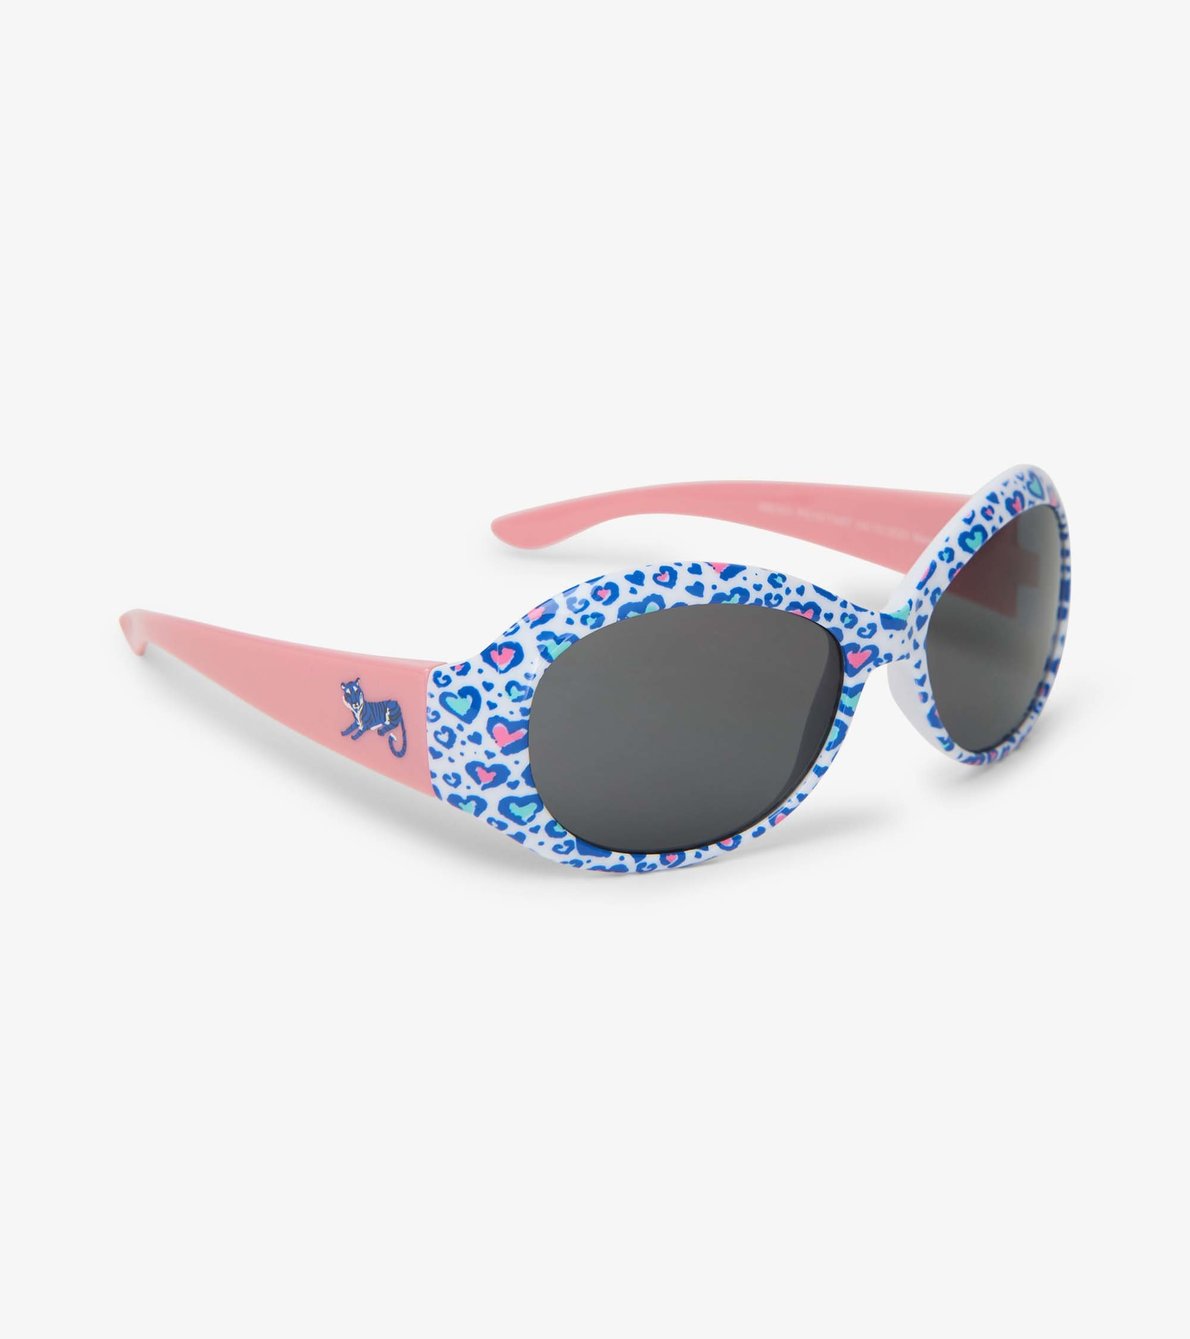 View larger image of Jungle Cats Sunglasses